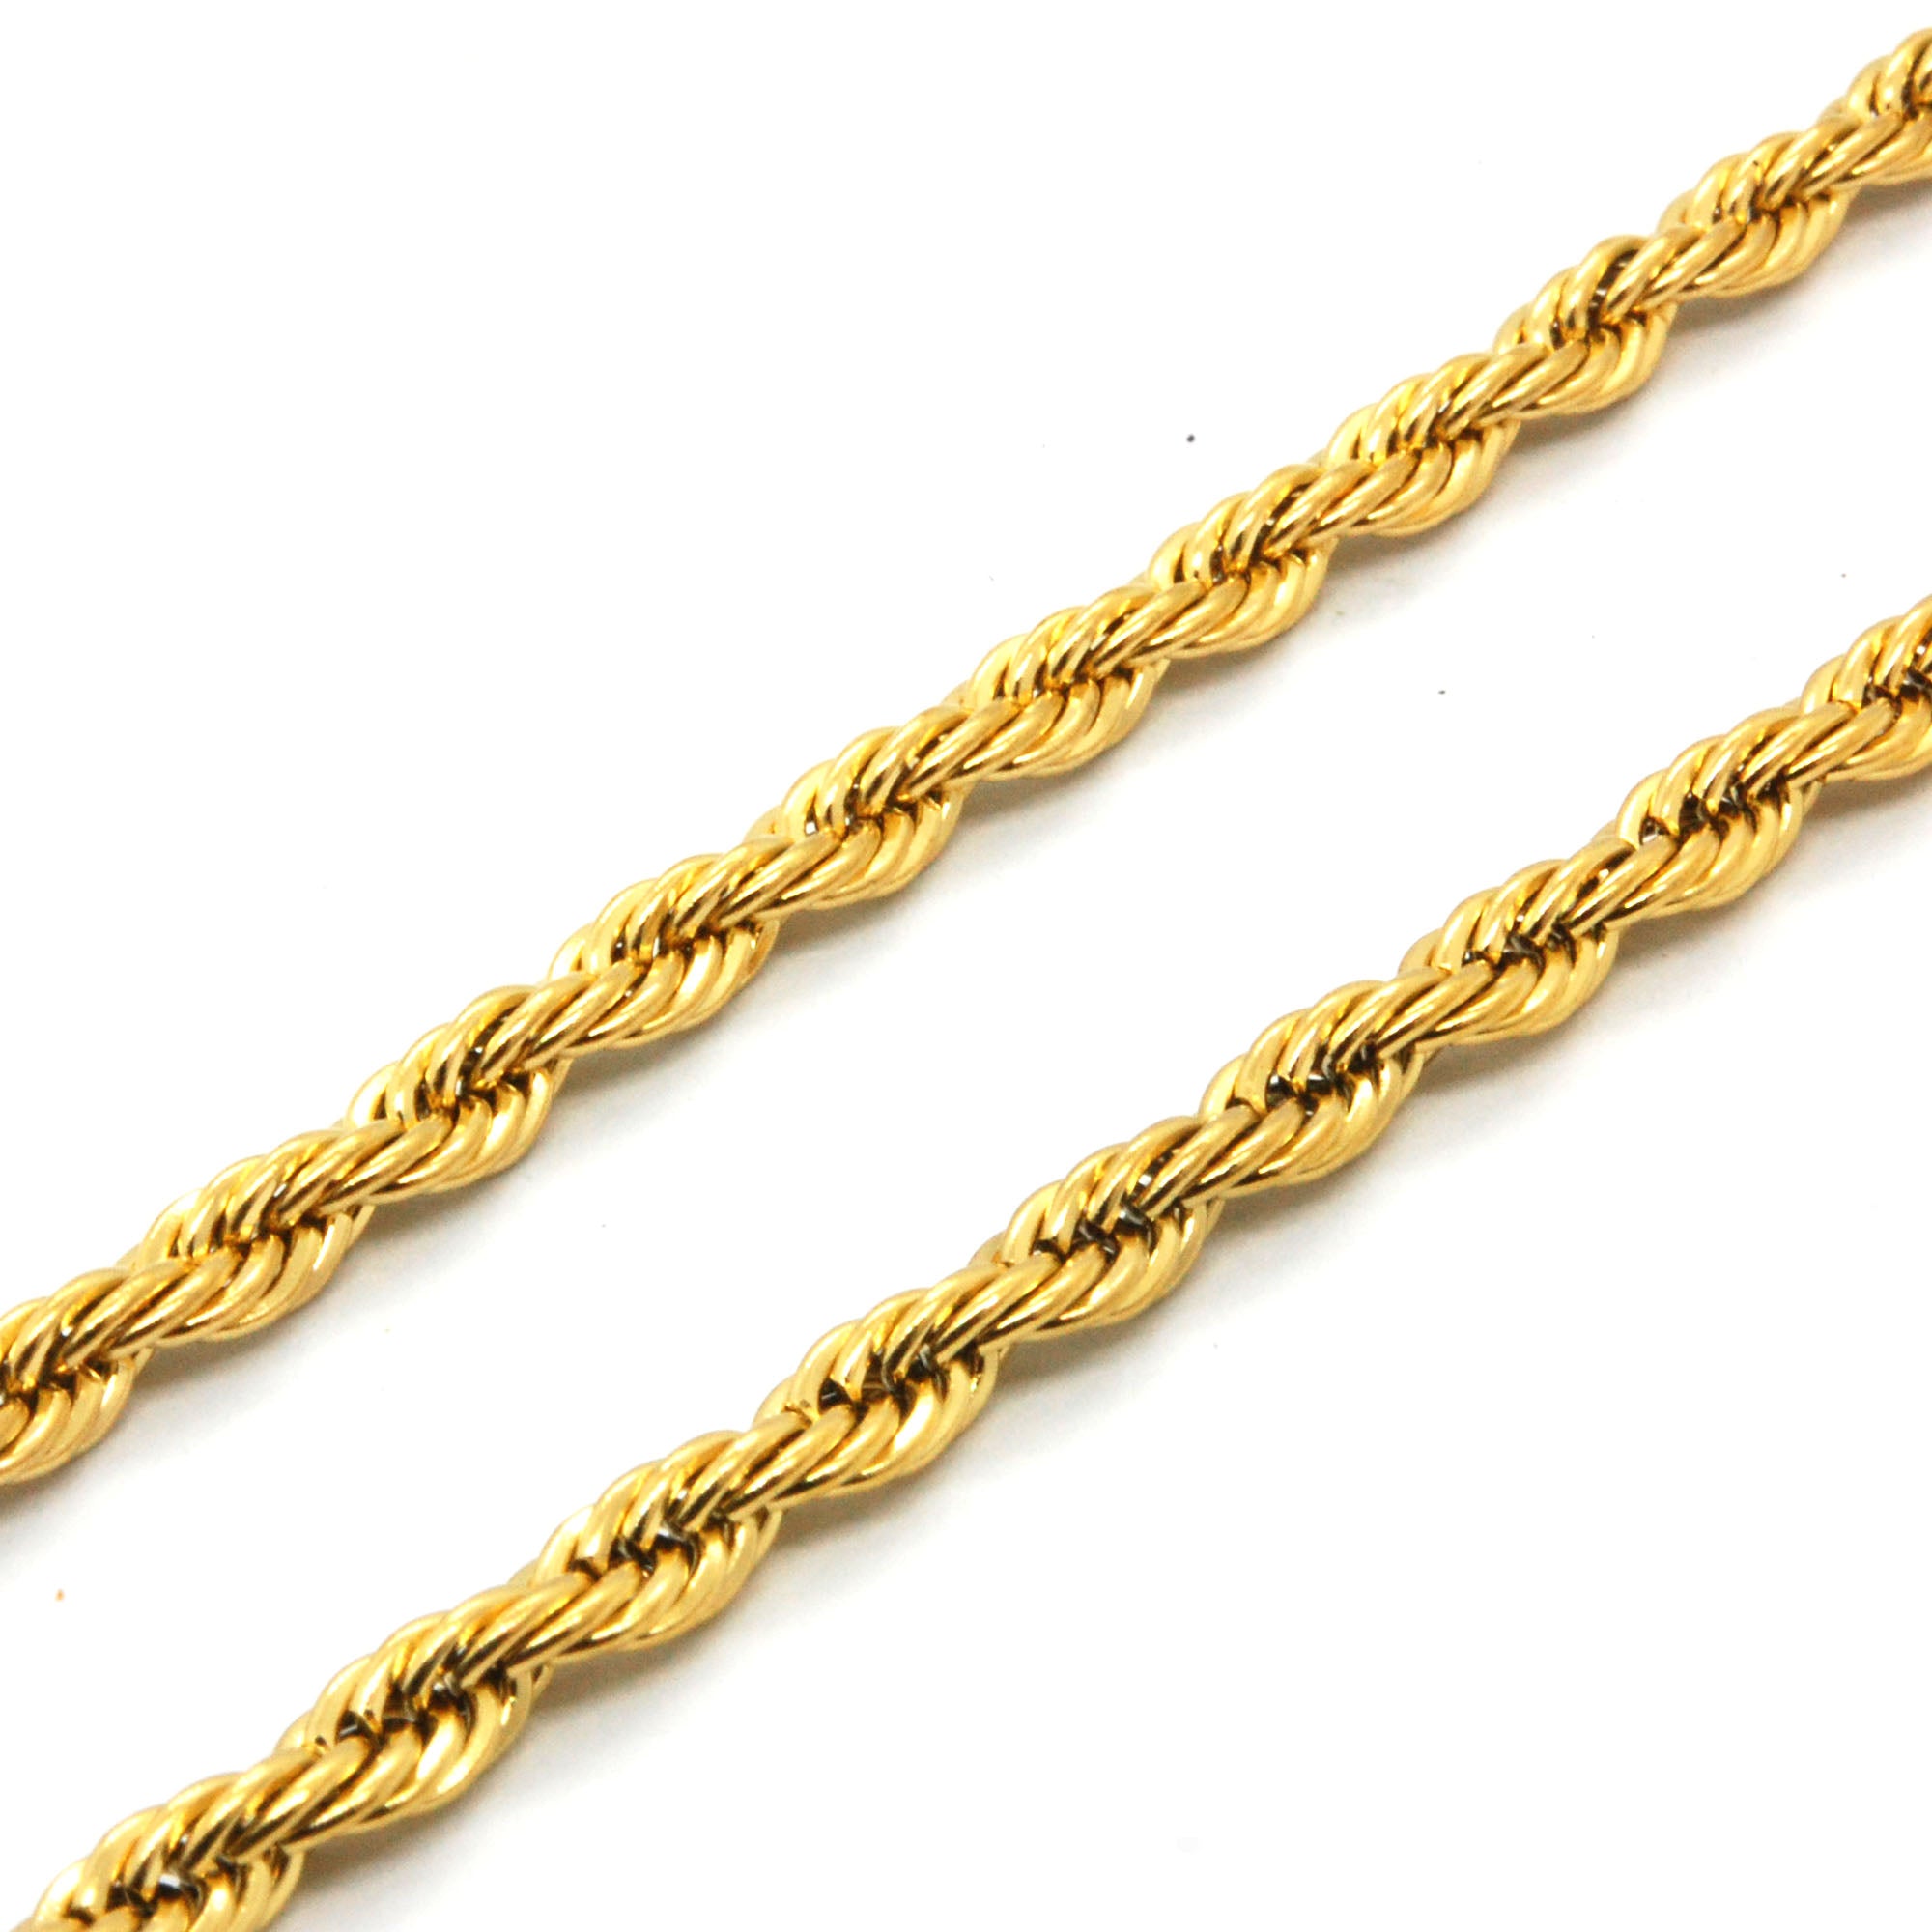 ESCH 7775: 23" Gold-Plated Large Twisted Rope (4mm)